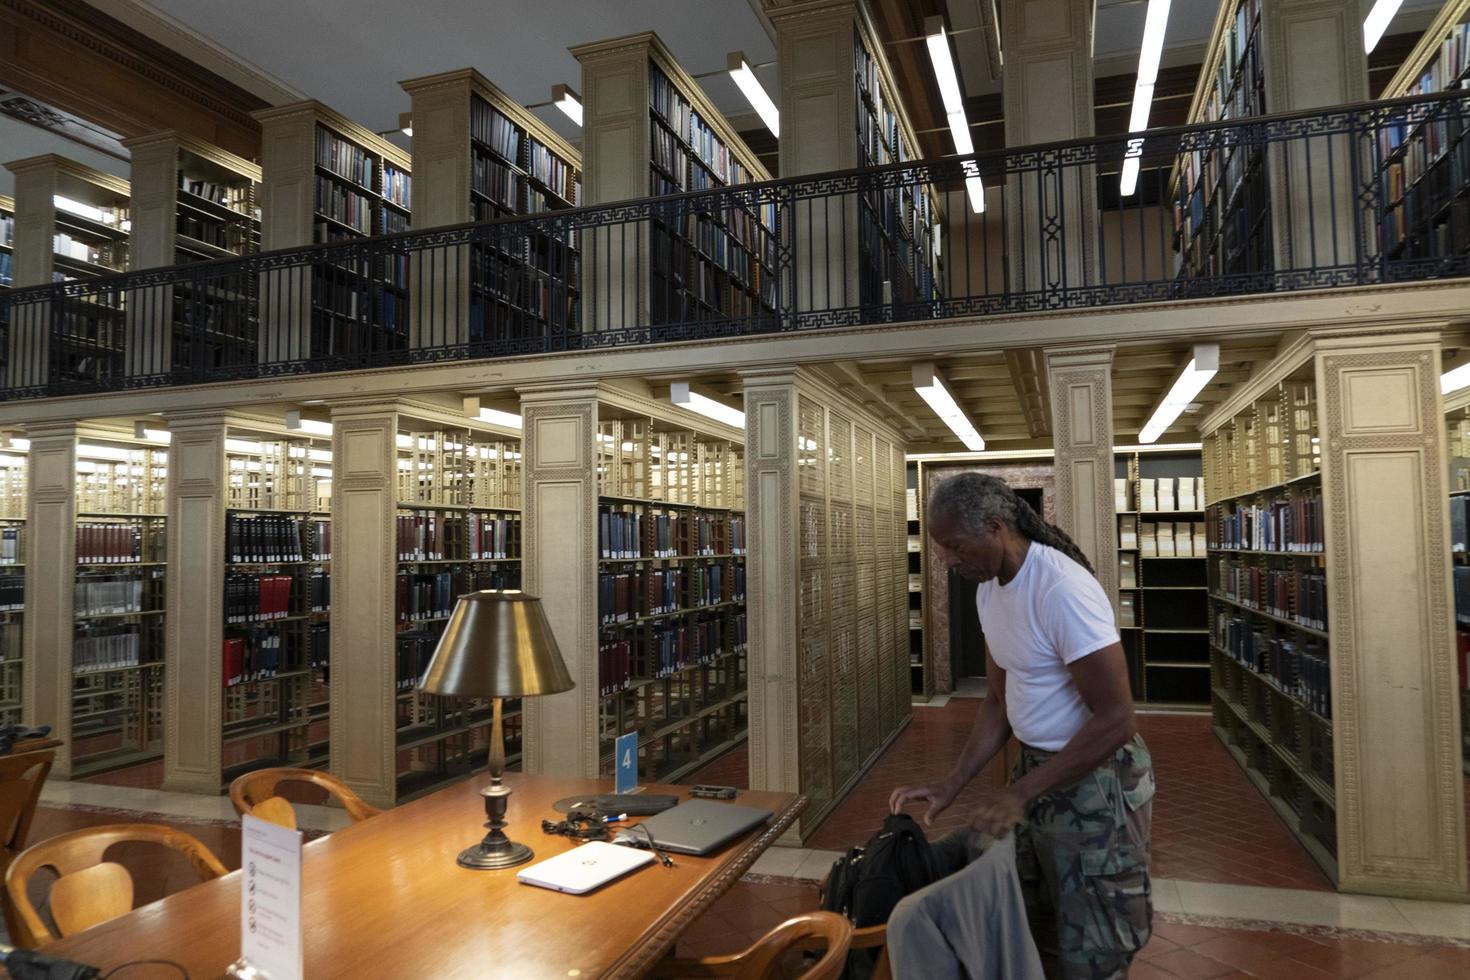 NEW YORK, USA - MAY 4 2019 - Interior of Public Library on 5th avenue photo